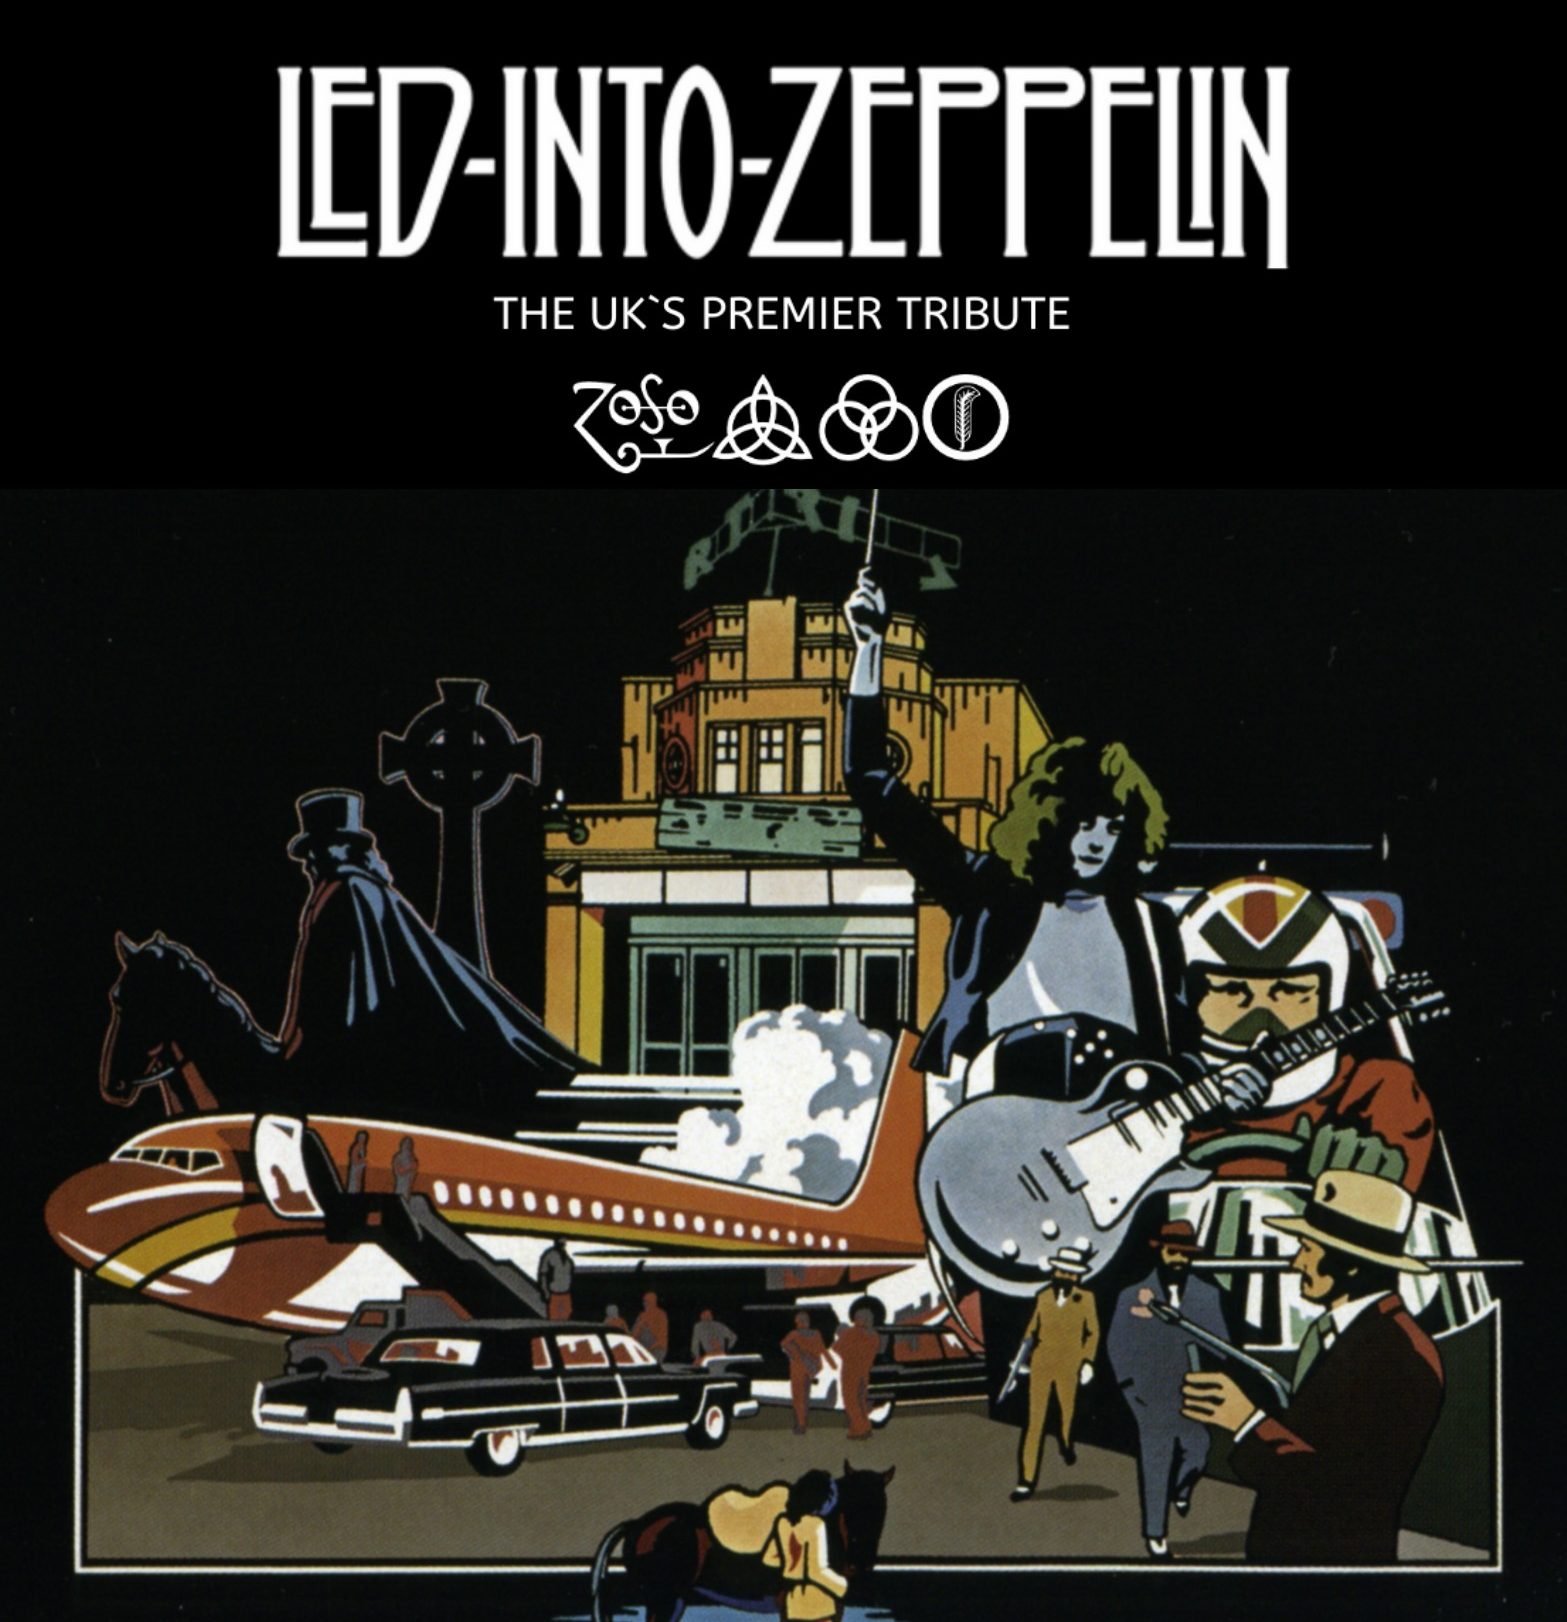 Led into Zeppelin in concert